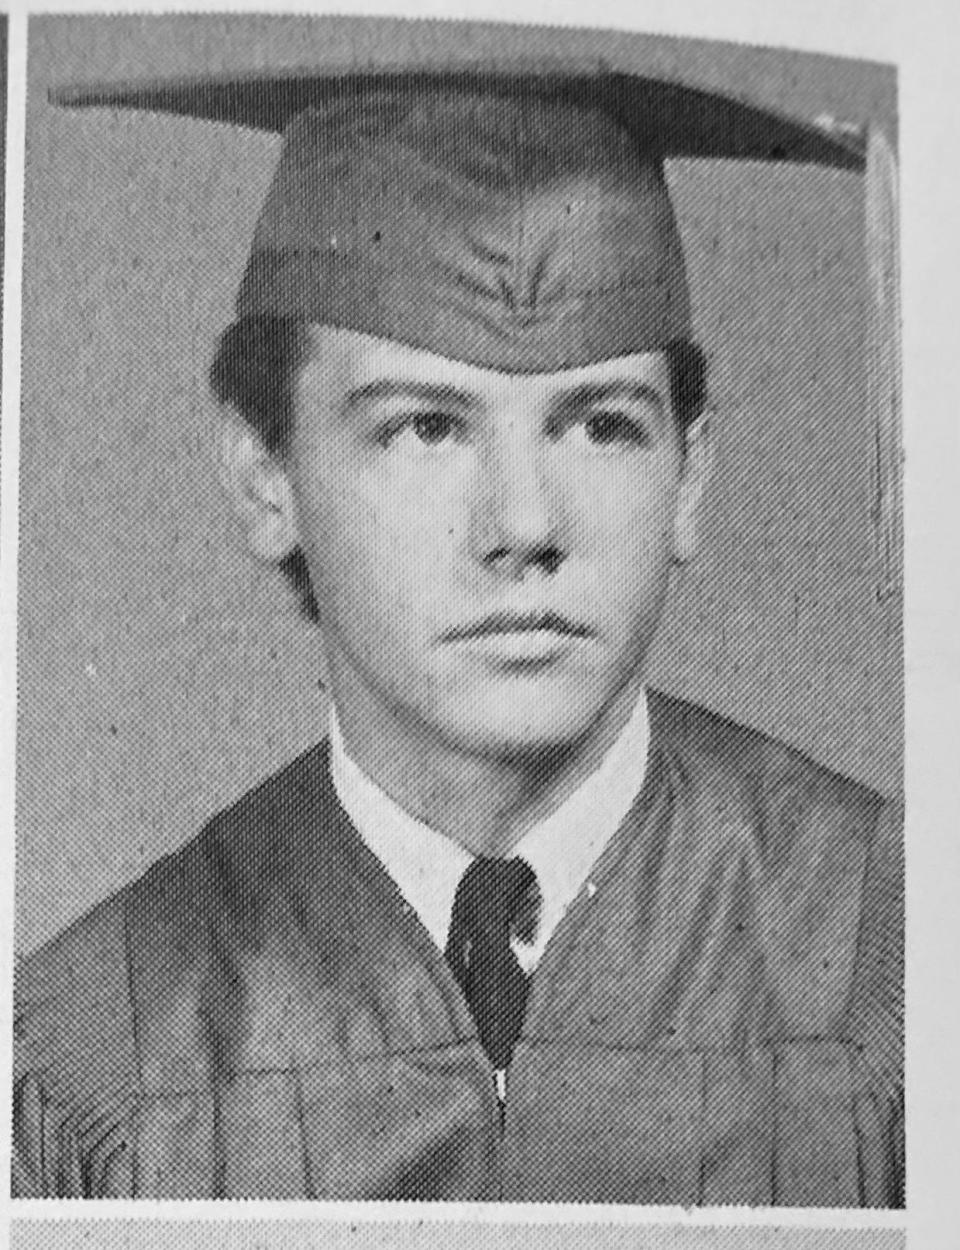 Darrell Callais Sr. as seen in his 1971 South Terrebone HIgh School yearbook picture.